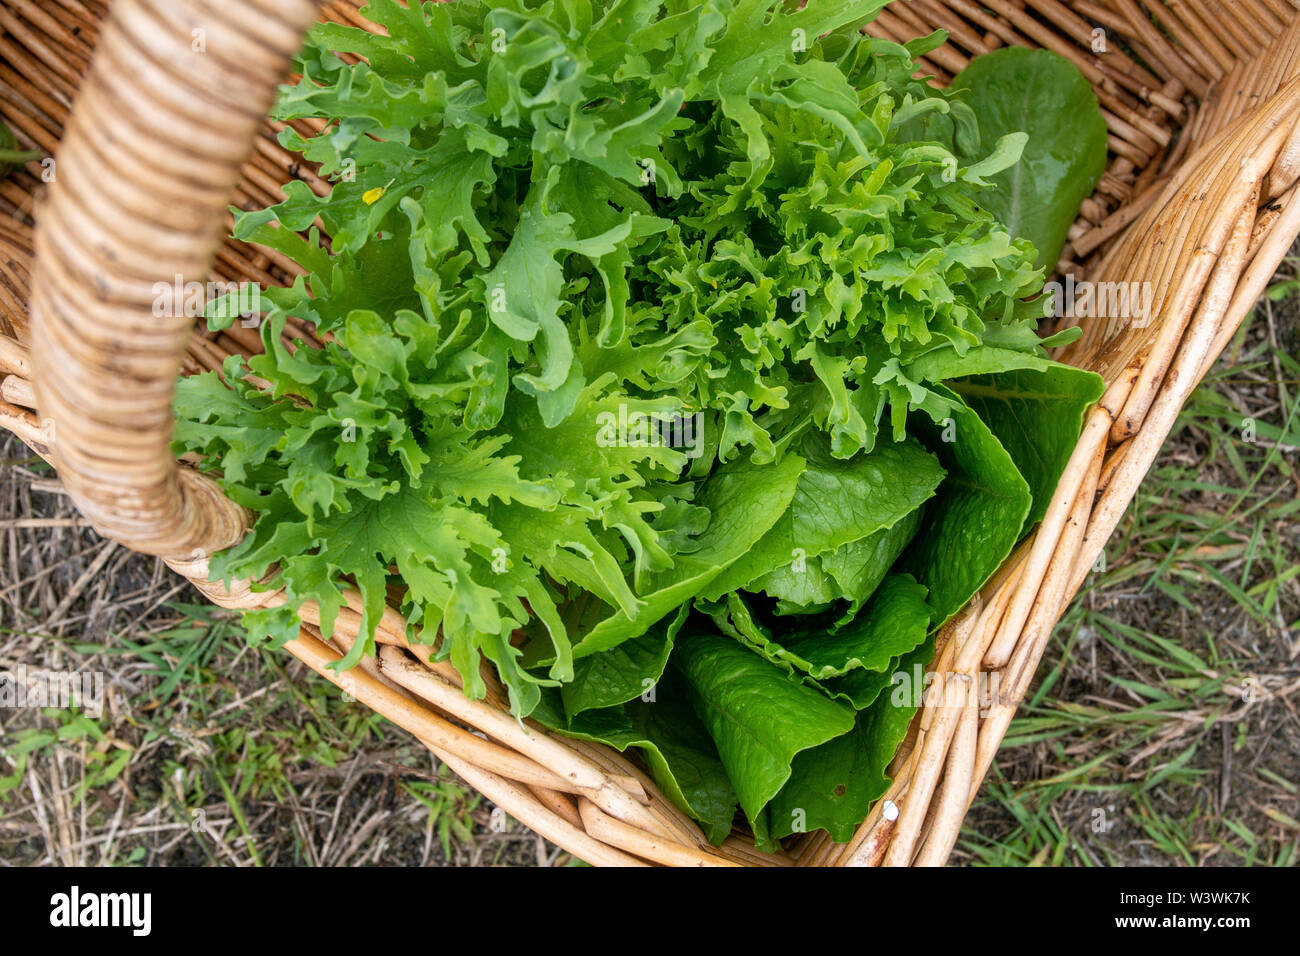 Fresh vegtables from a backyard garden are harvested and in basket to be enjoyed. Stock Photo